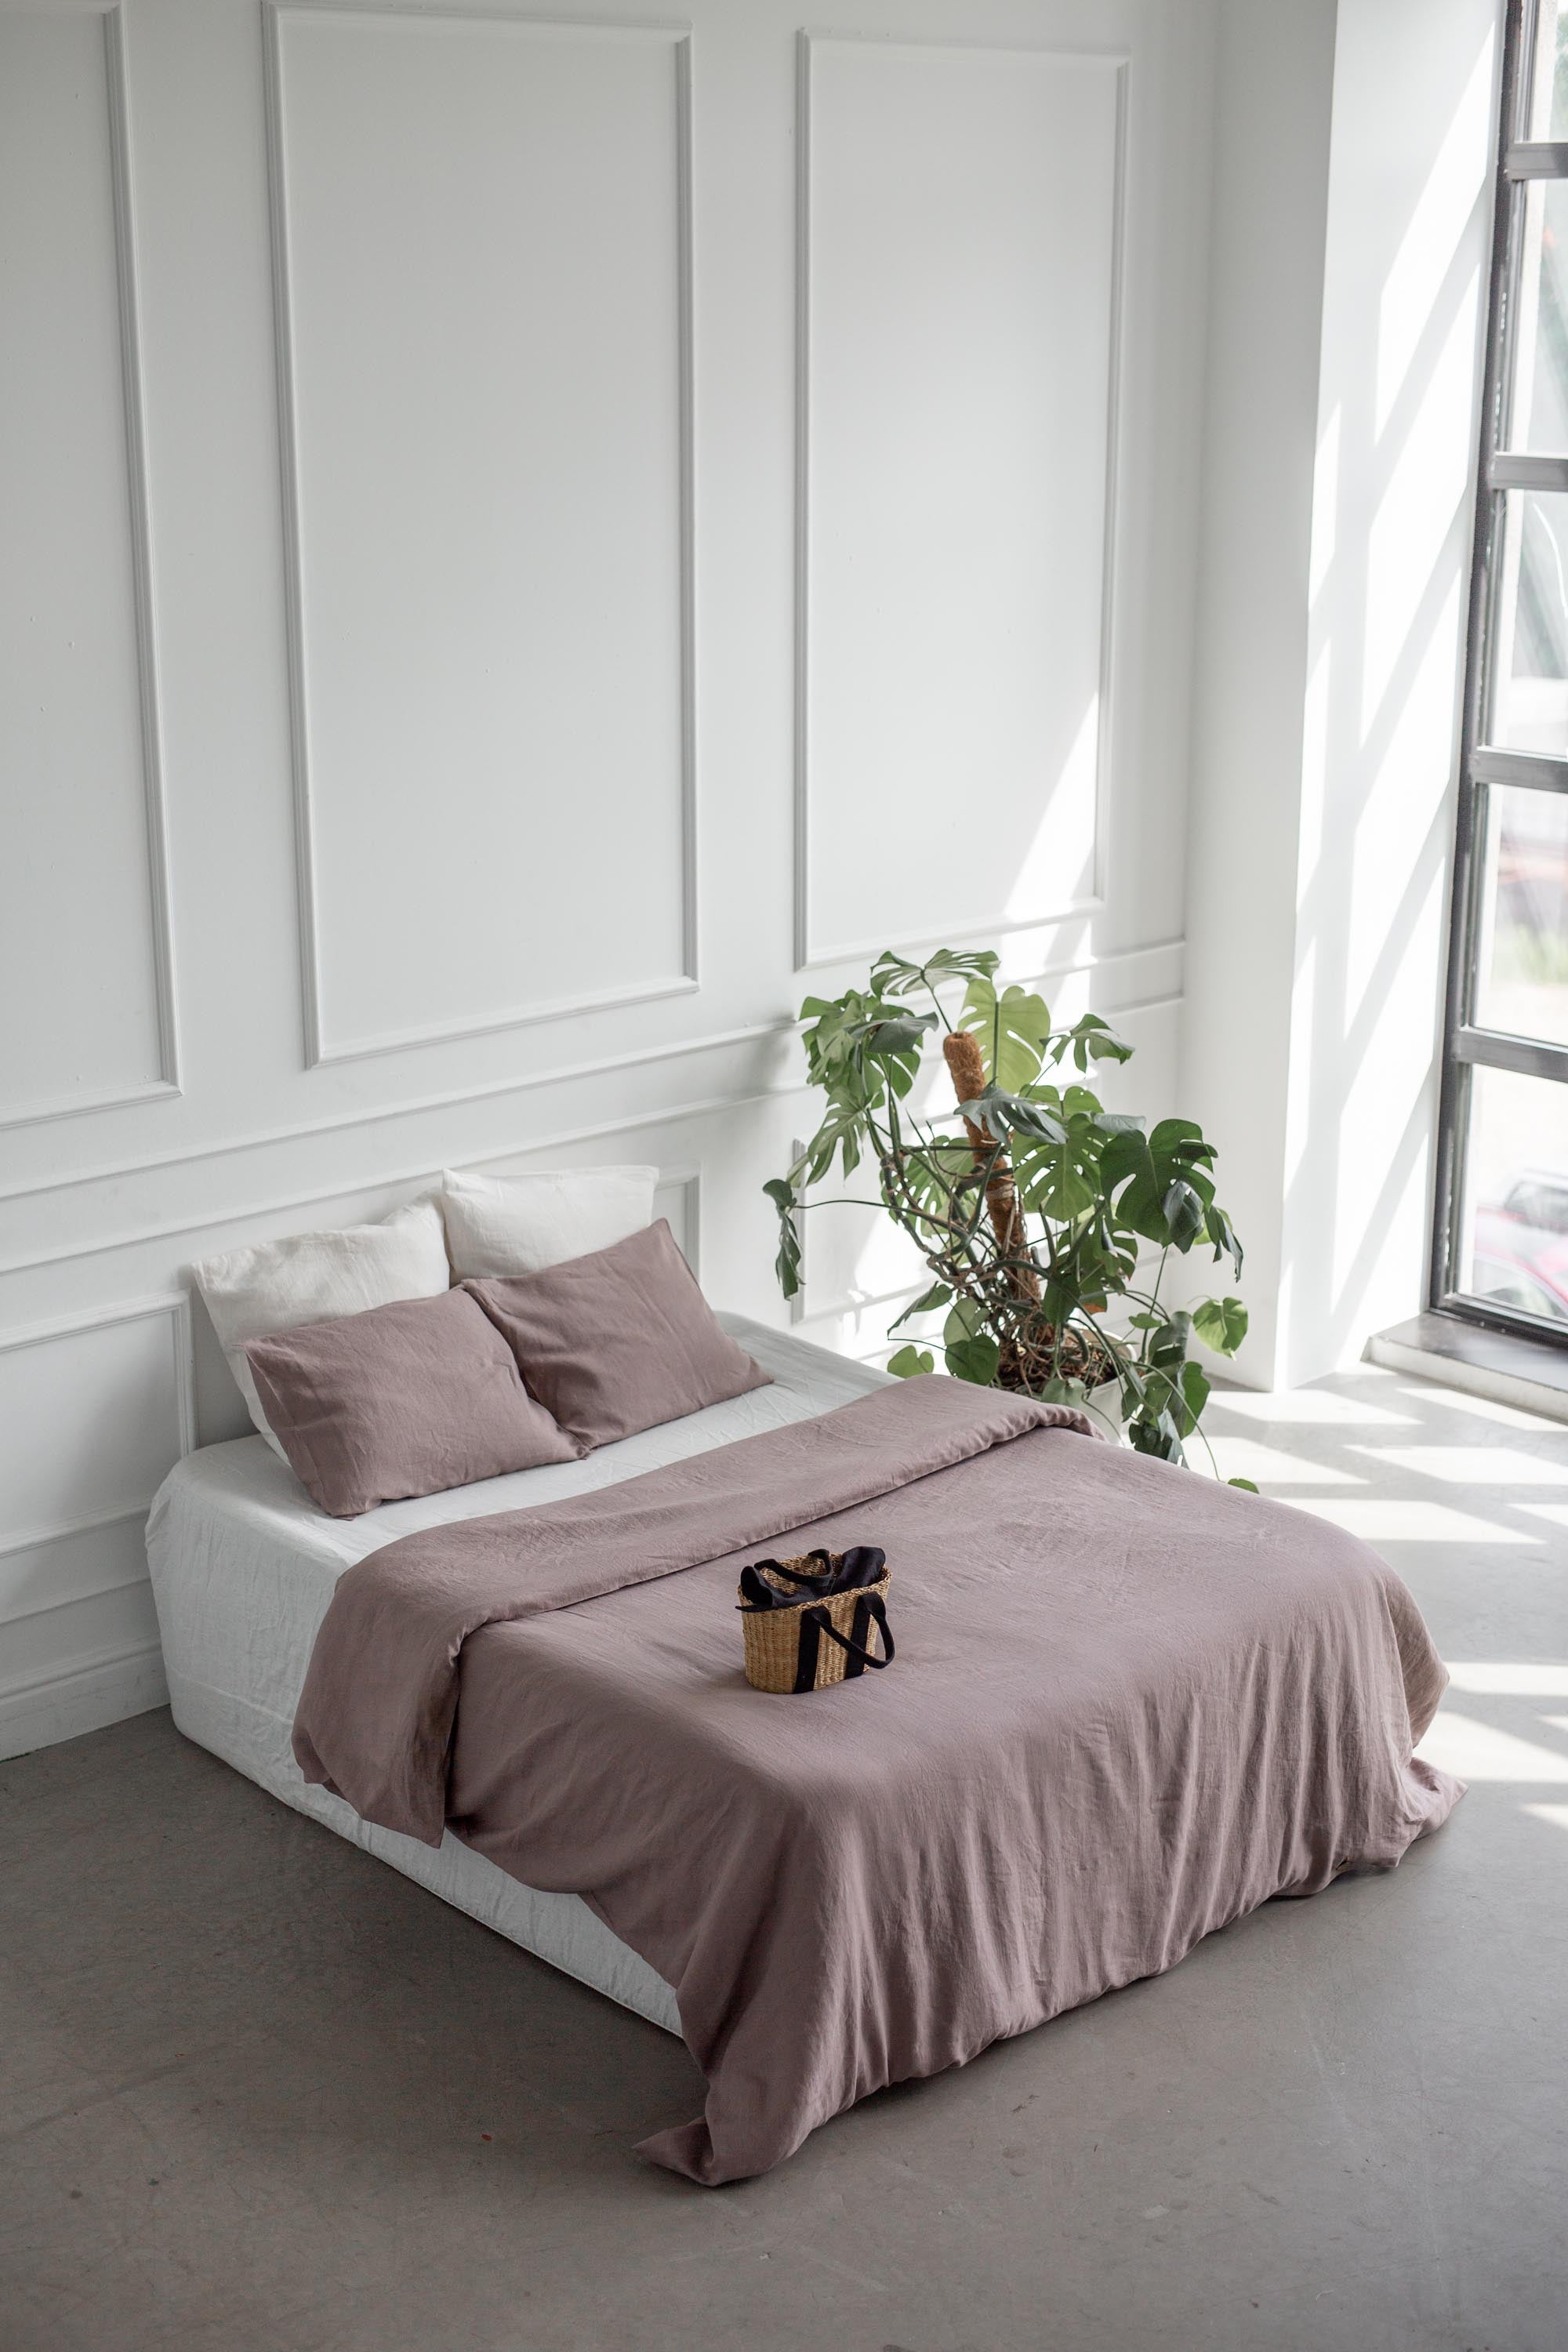 Minimalistic Room With Bed That IS Covered With A Linen Duvet Cover In Rosy Brown By AmourlInen